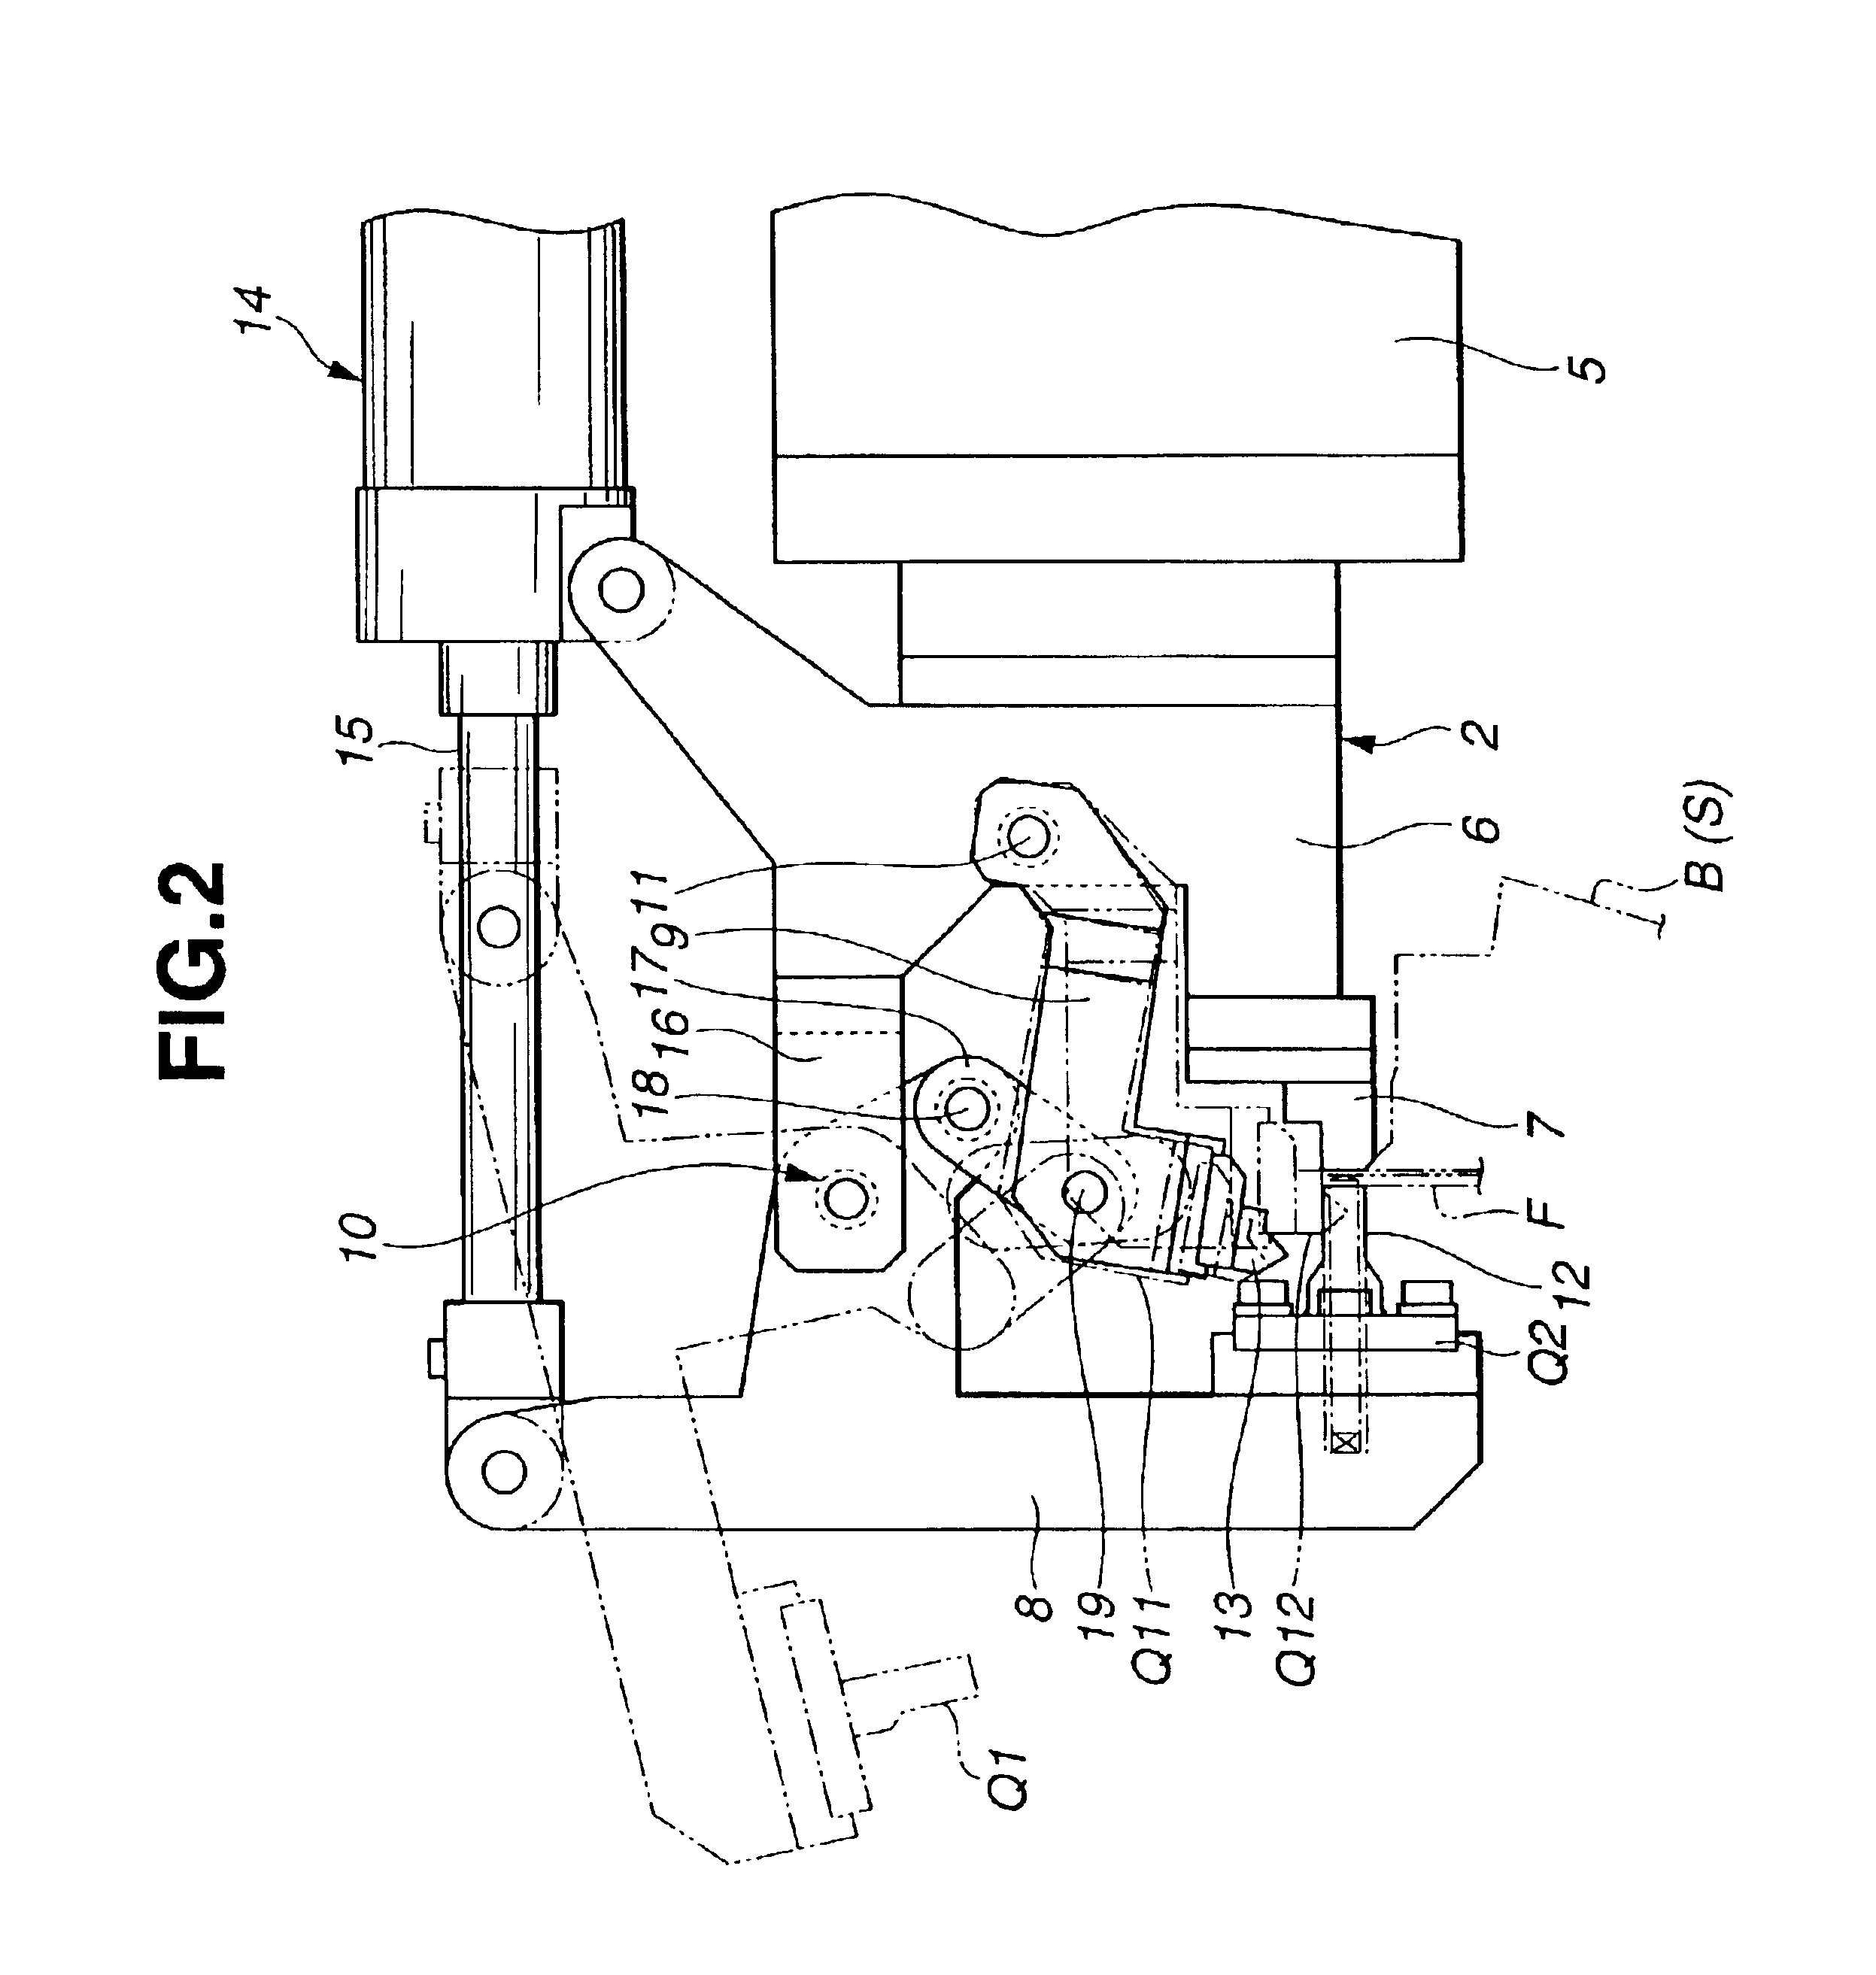 Preliminary assembly system and assembly method for vehicle body component parts